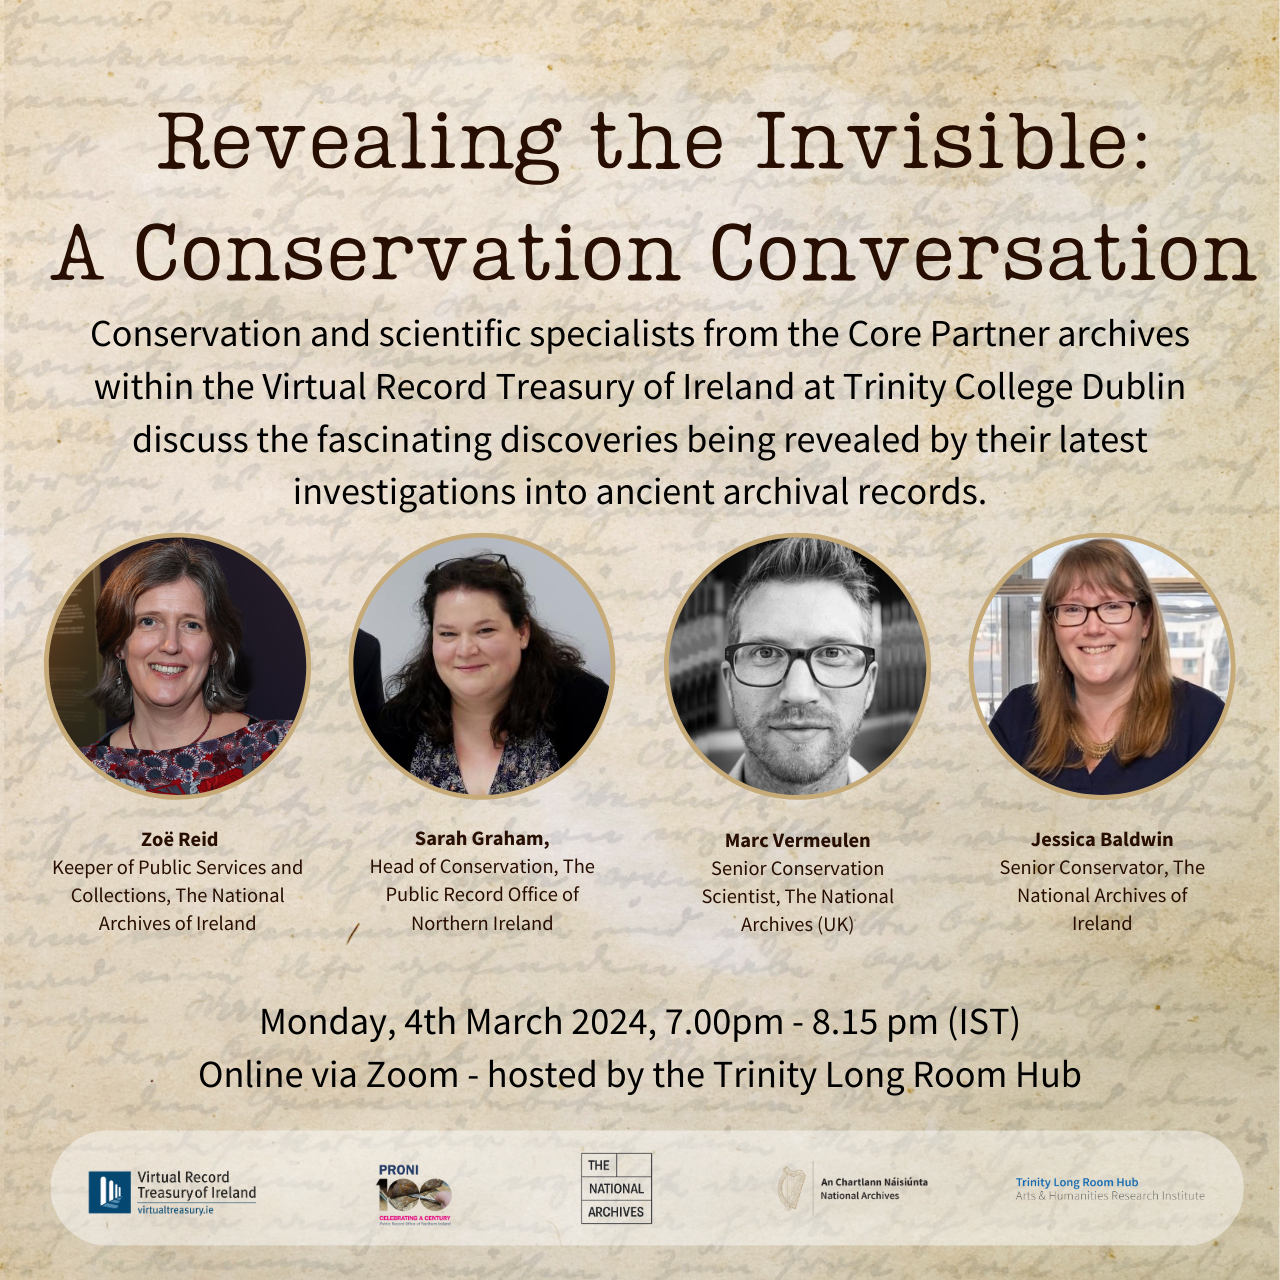 Conservation Conversation hosted by Trinity Long Room Hub